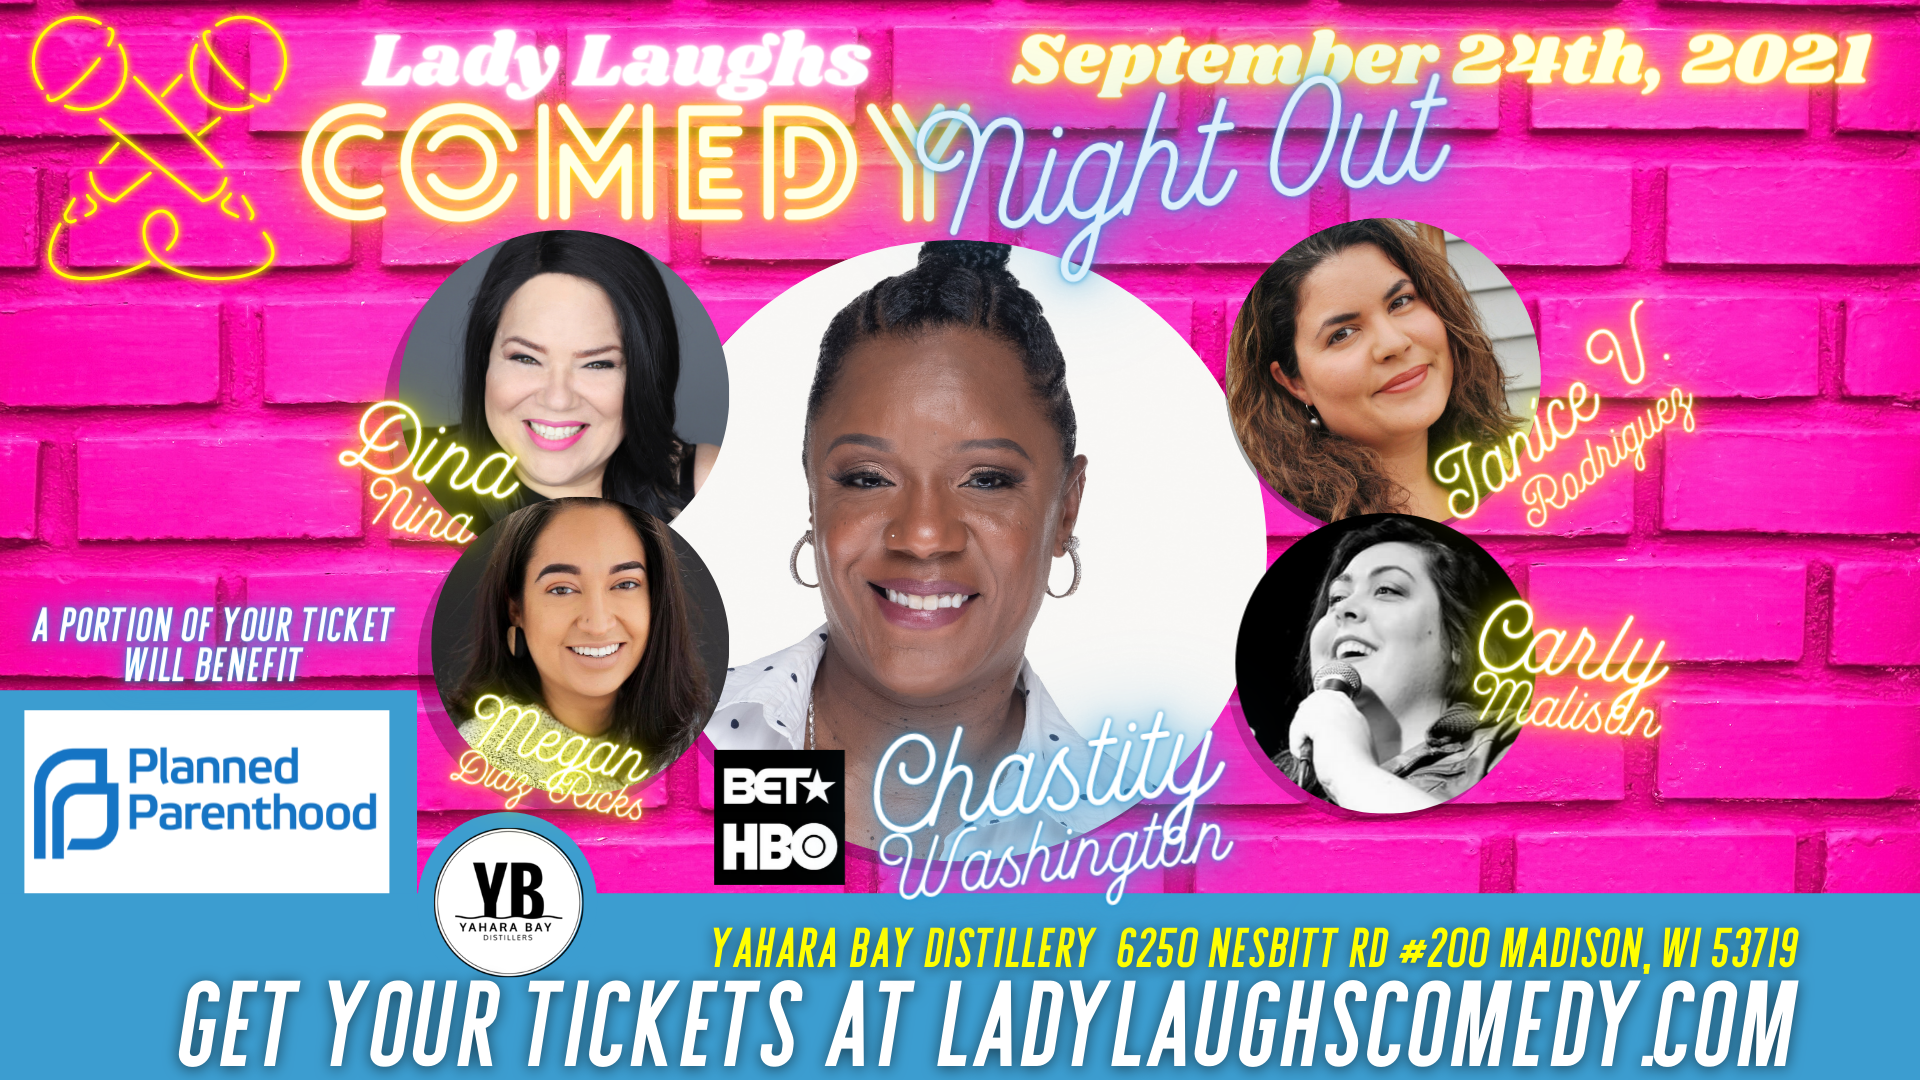 You are currently viewing Lady Laughs Comedy Night Out In Madison, WI on 9/24/21